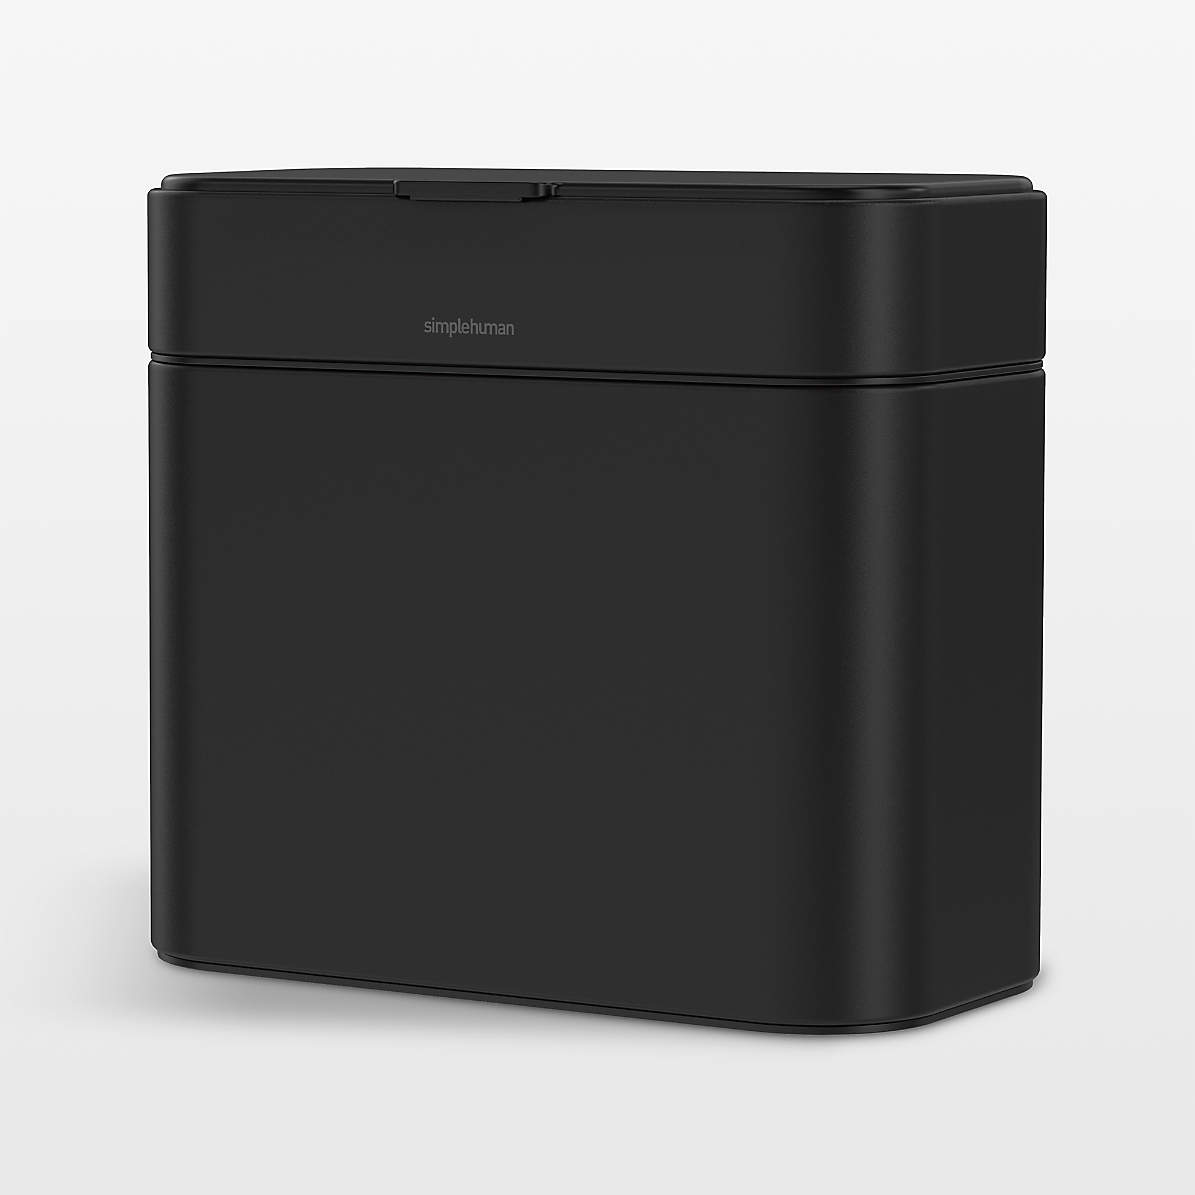 simplehuman 4-Liter Matte Black Stainless Steel Compost Caddy + Reviews, Crate & Barrel in 2023